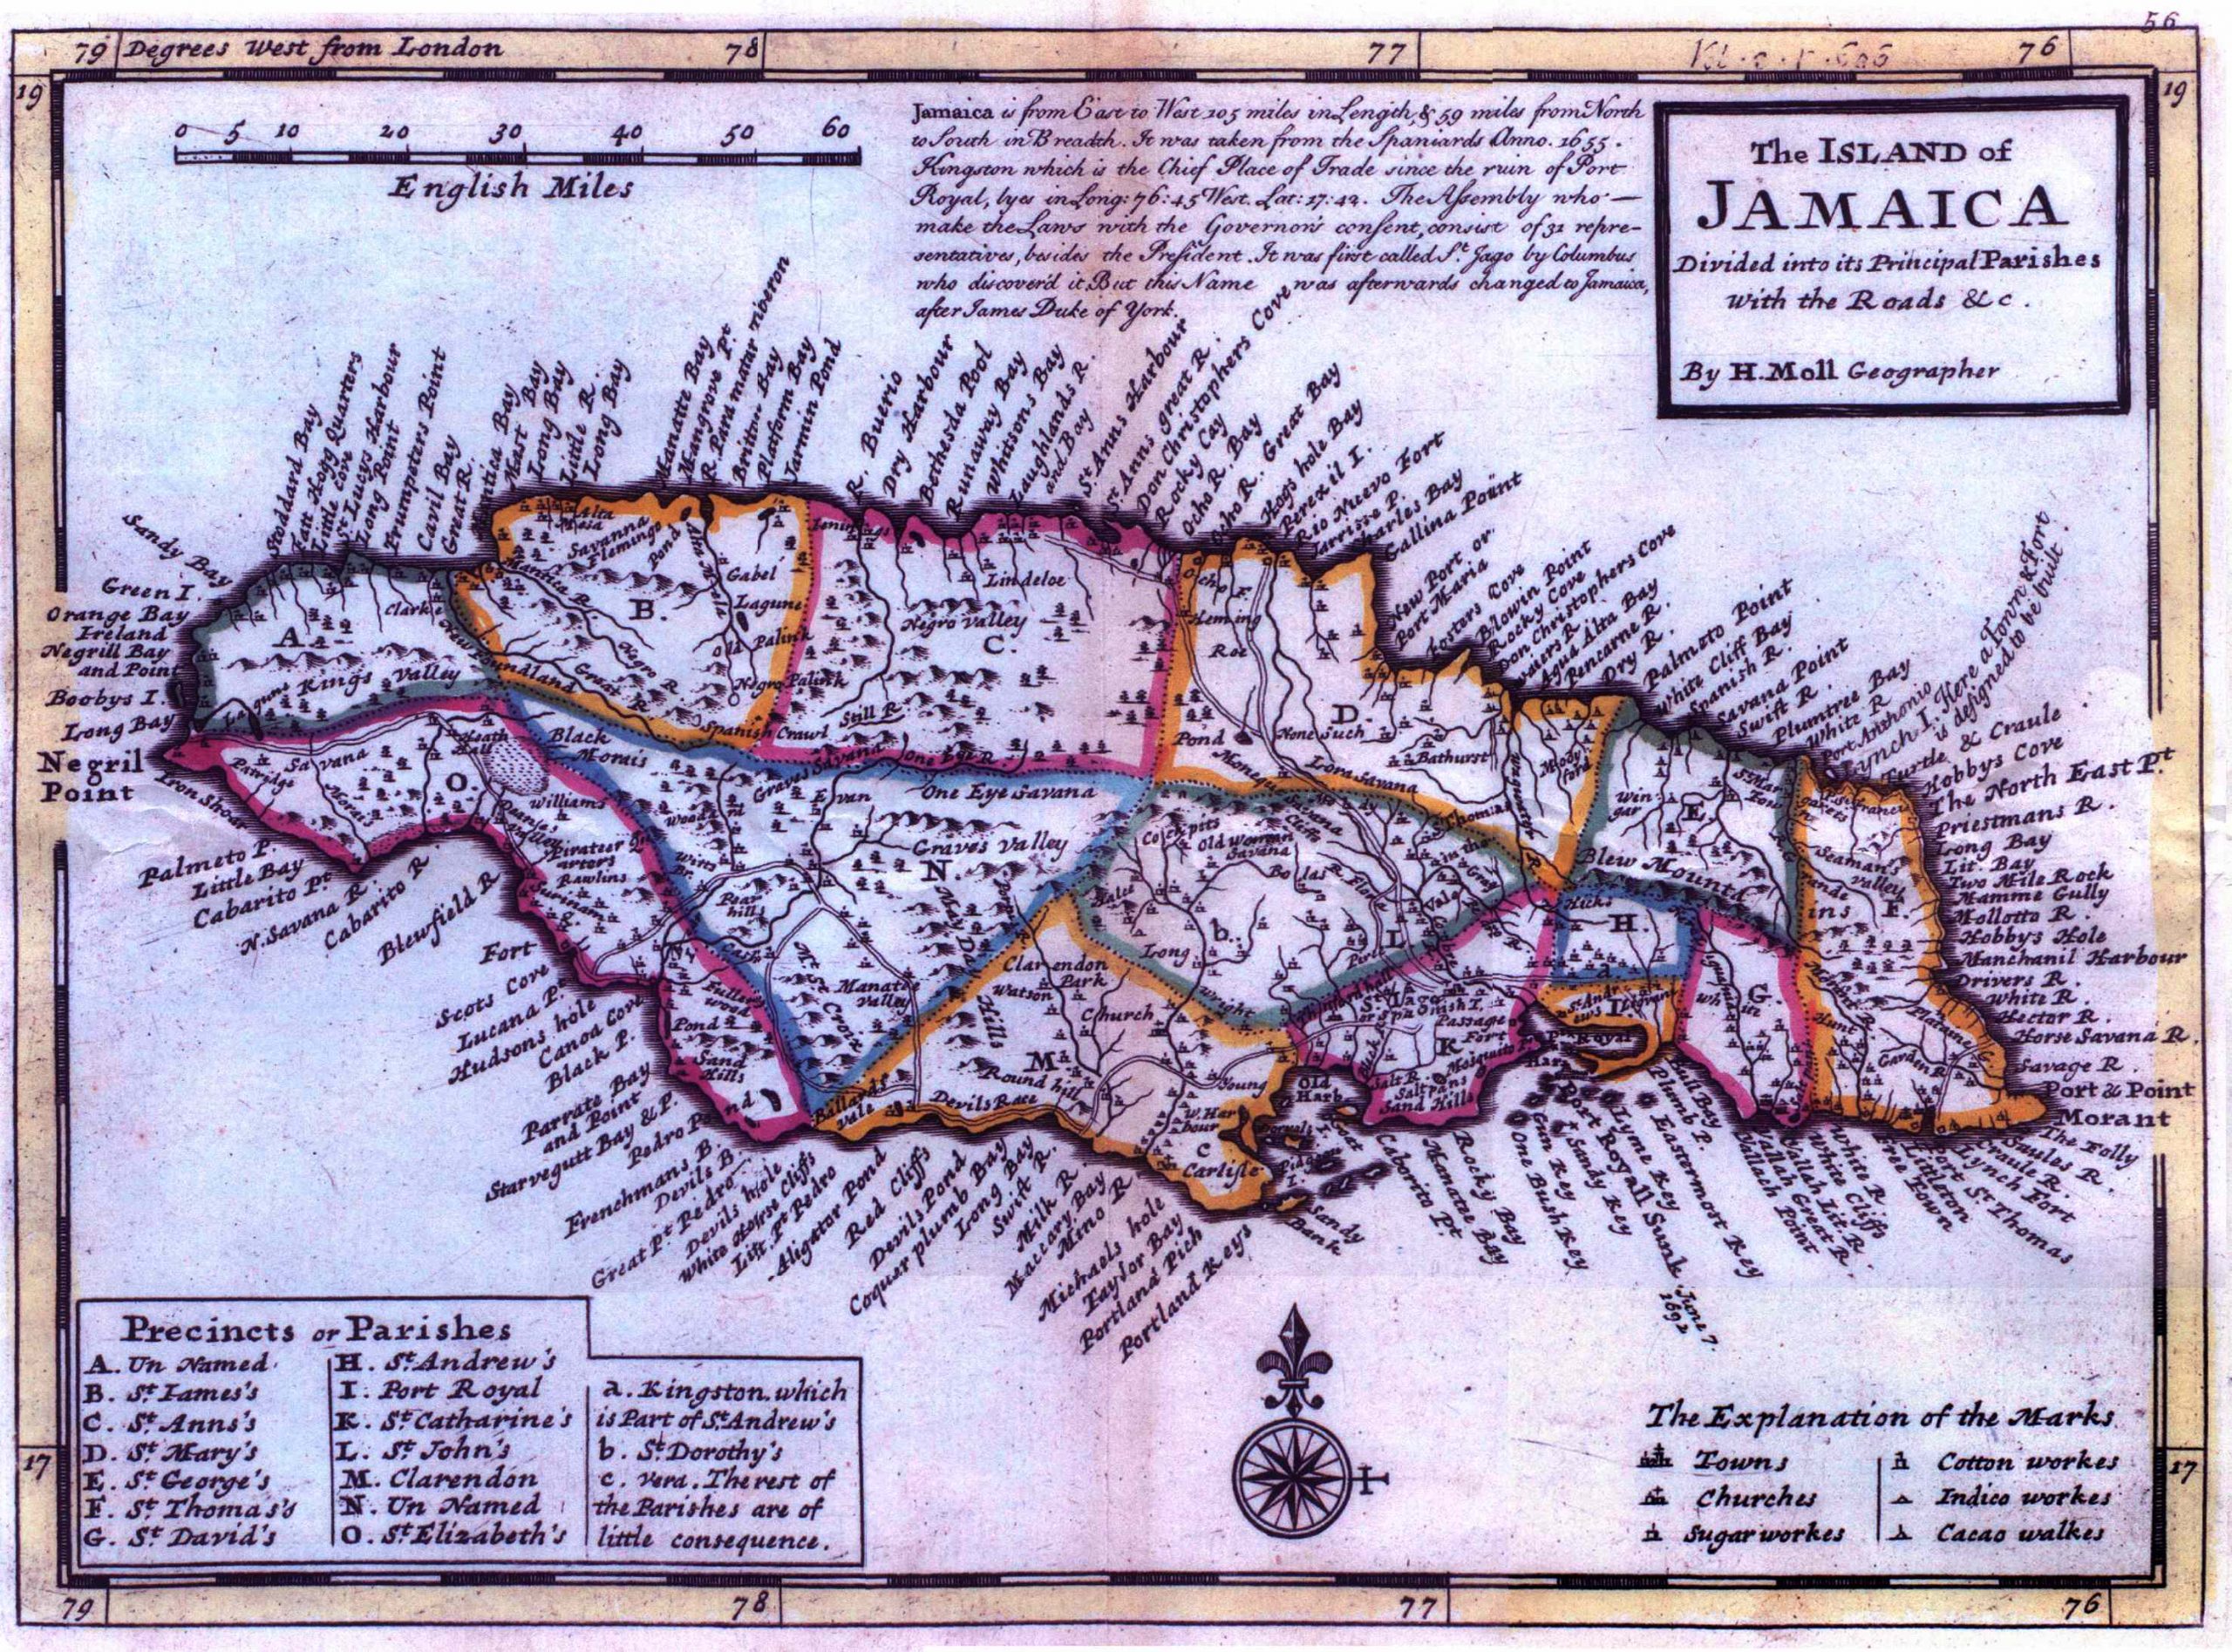 Moll's 1728 Map of Jamaica